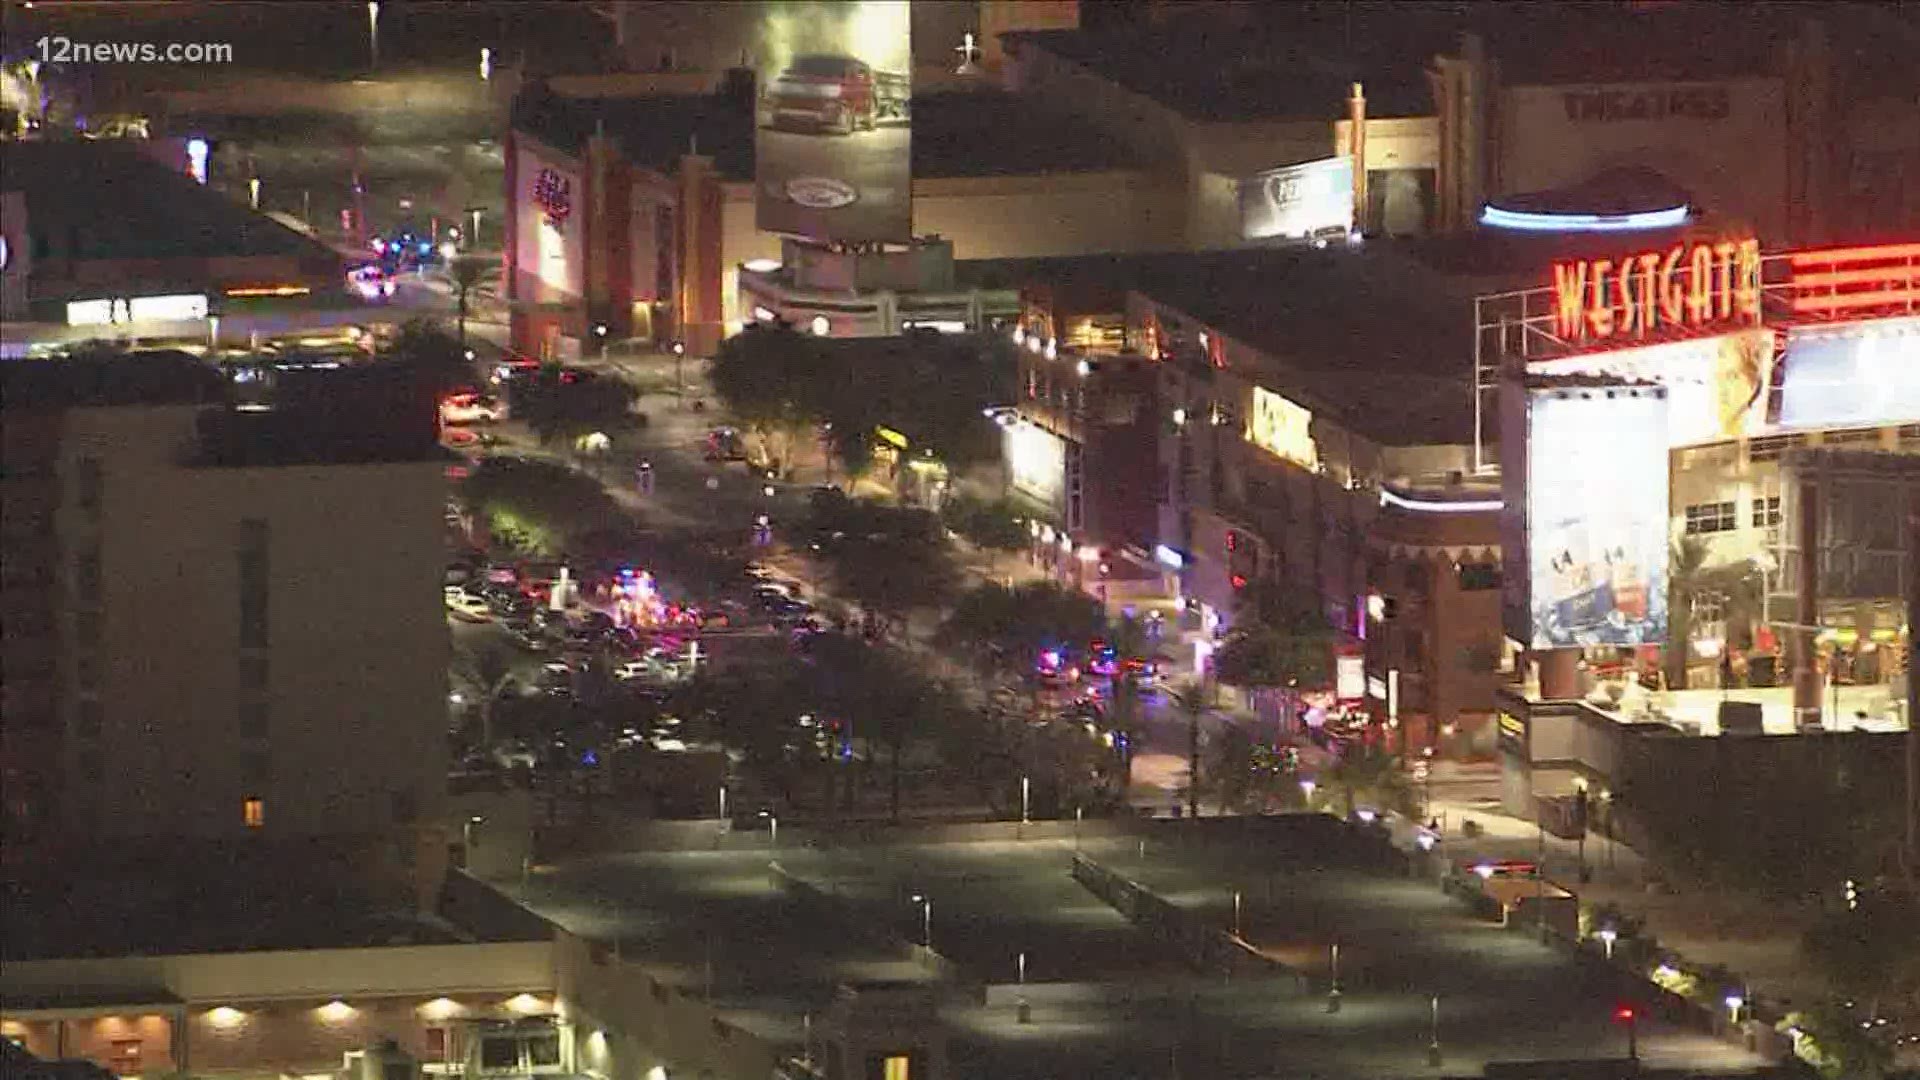 Three people were rushed to the hospital Wednesday evening after gunshots rang out at Glendale's Westgate Entertainment District.